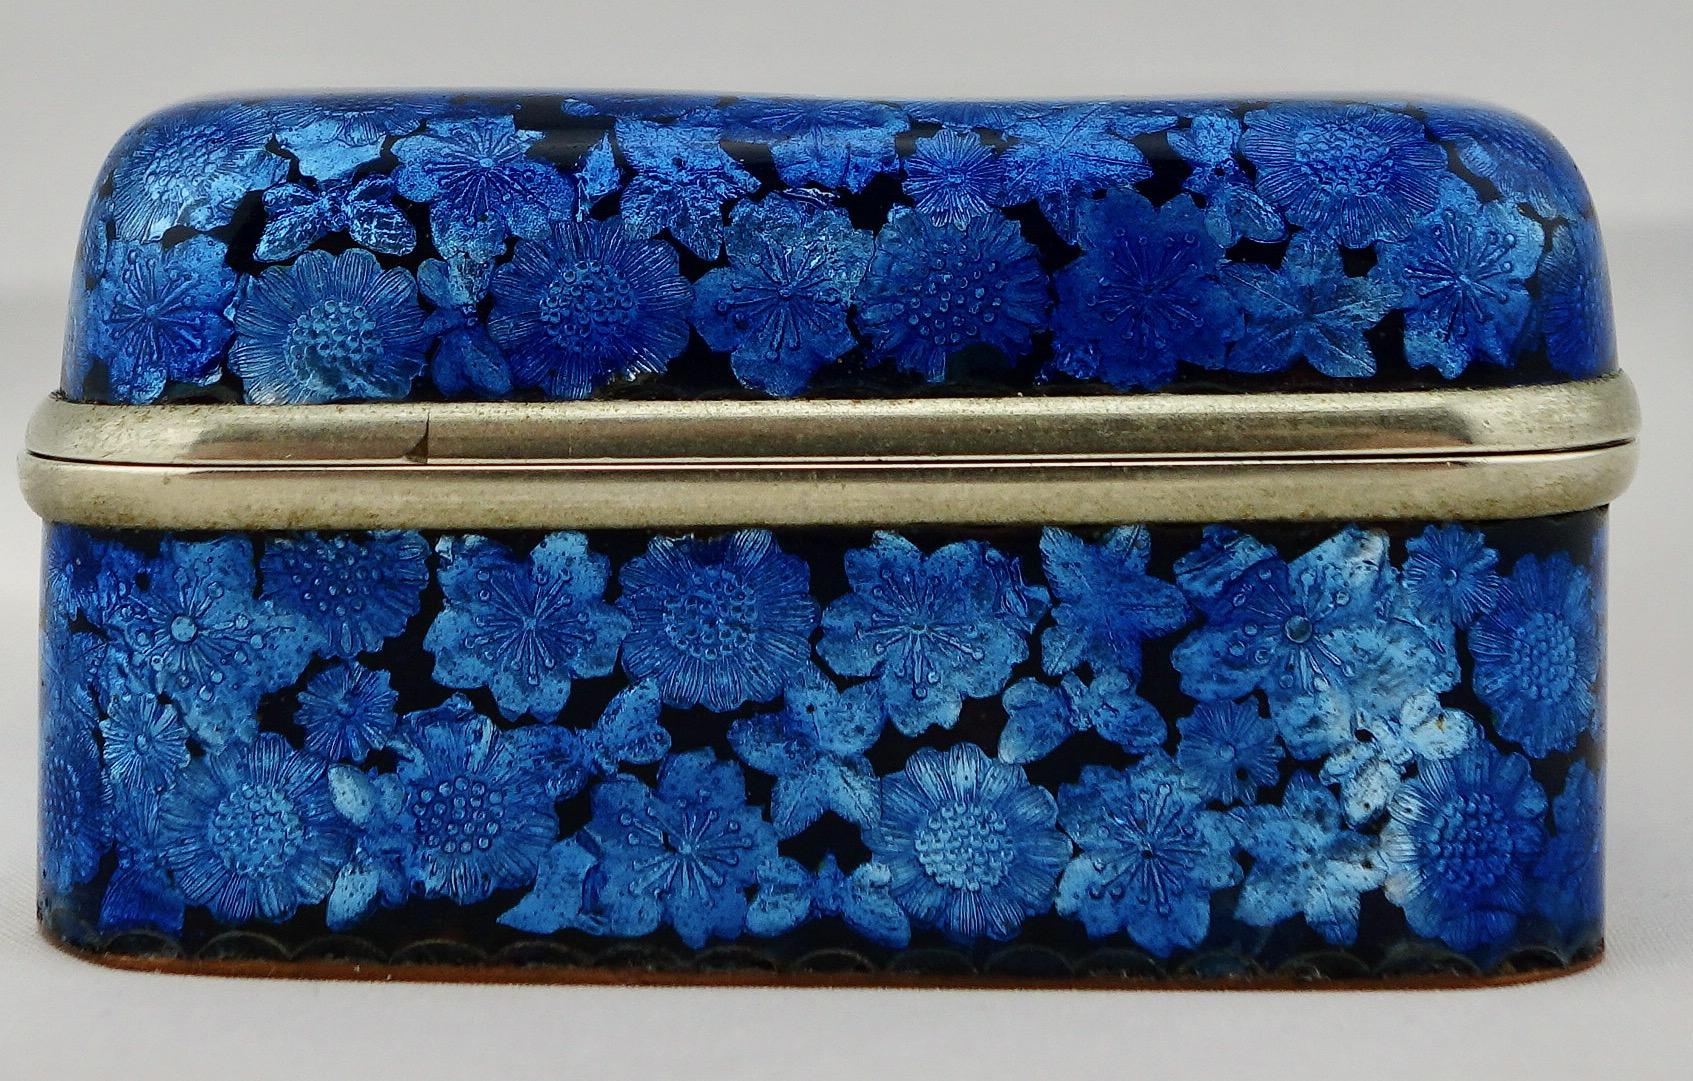 19th Century Japanese Meiji Ginbari Cloisonne Finely Decorated Floral Box